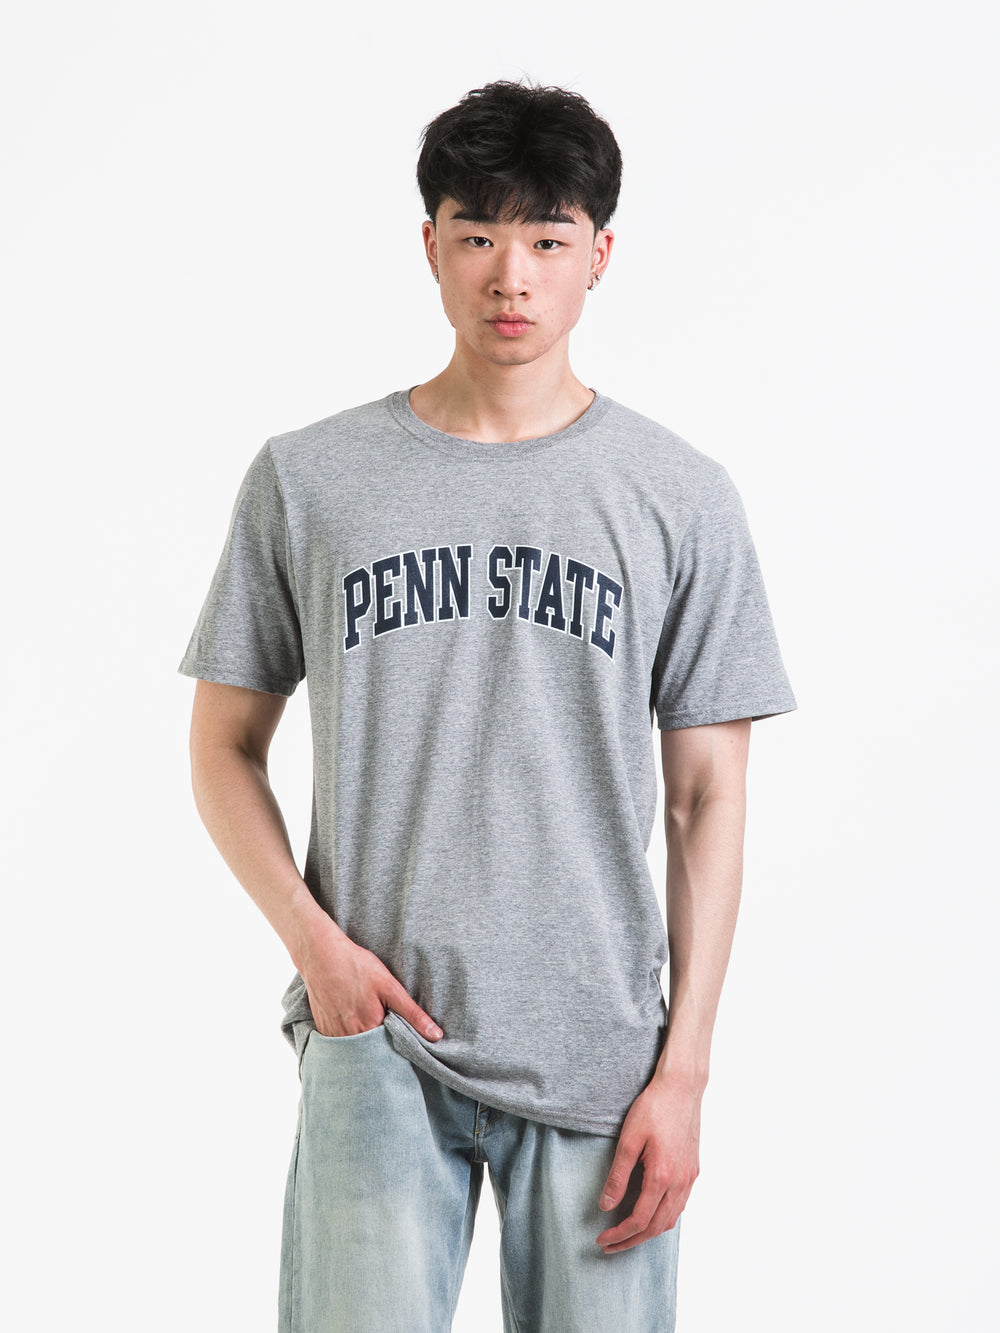 RUSSELL PENN STATE T-SHIRT  - CLEARANCE